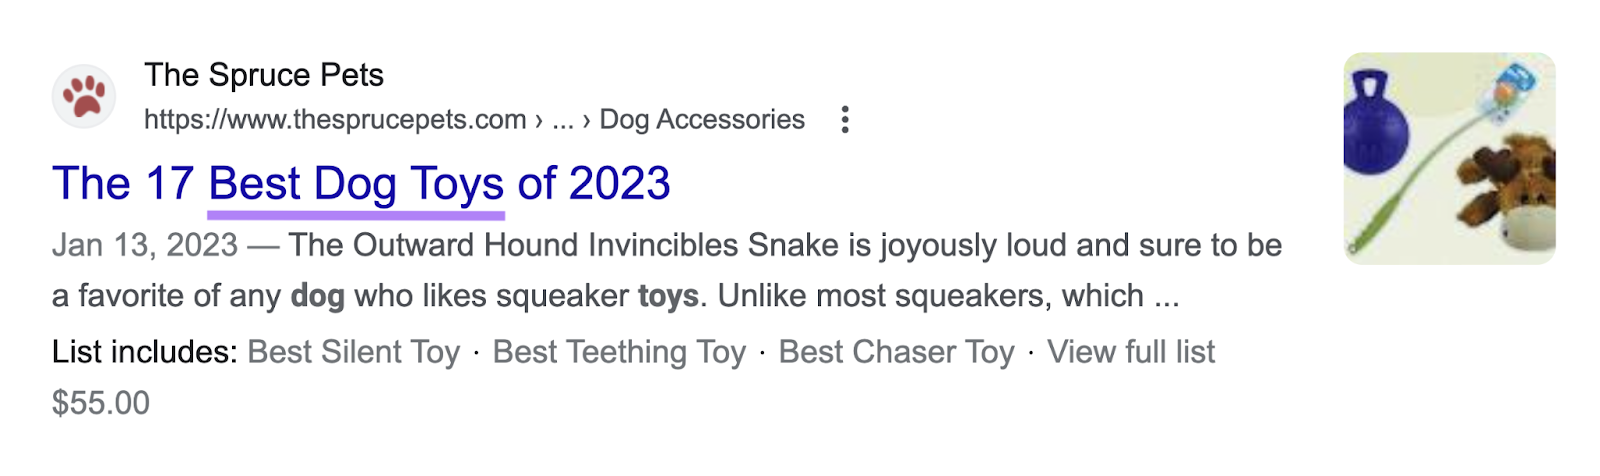 "Best Dog Toys" highlighted in "The 17 Best Dog Toys of 2023" title tag on Google SERP